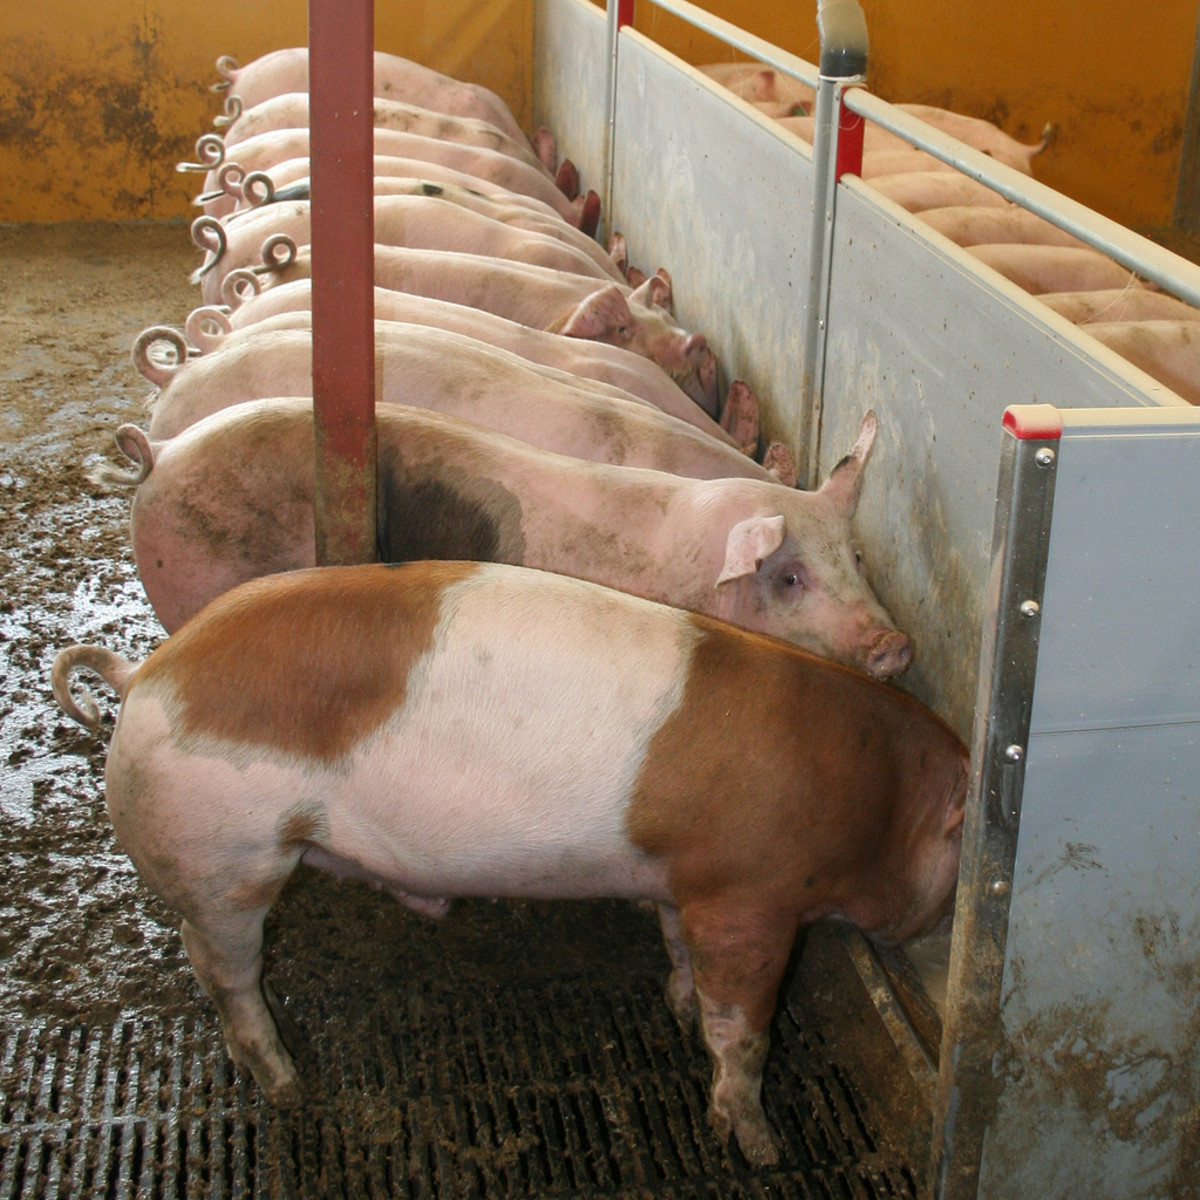 Mutating New Pig Virus Expected to Kill Millions of Baby Pigs and Cripple Pork Industry